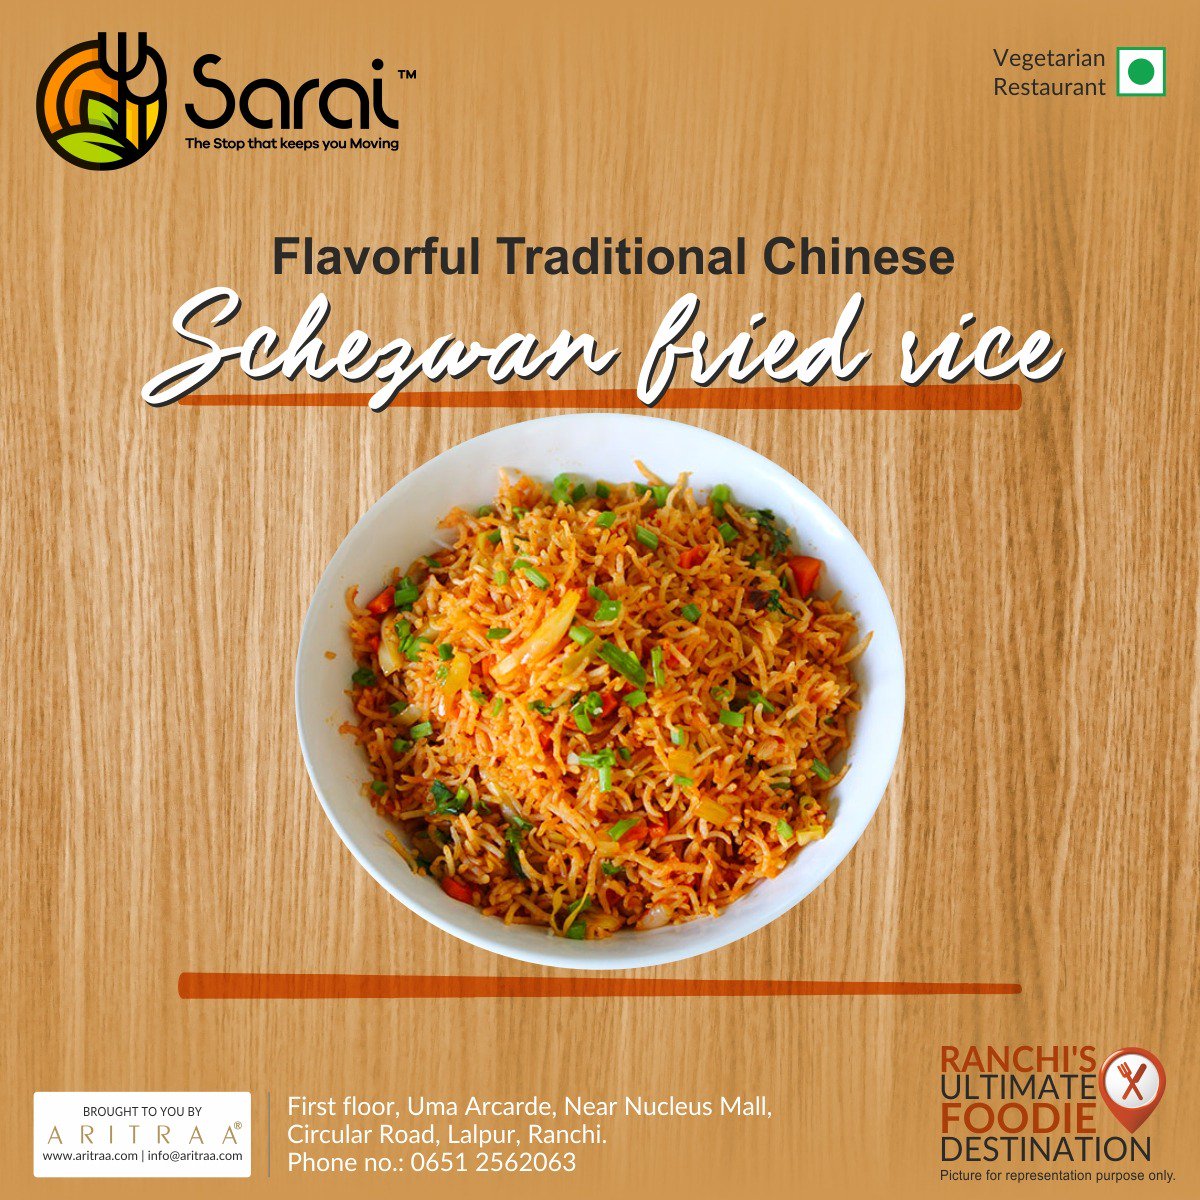 #Flavorful #Traditional #Chinese
#Schezwanfriedrice
Connect on aritraa.com instagram.com/sarai_restaura…
twitter.com/RestaurantSarai
#celebratelife #food #instagood #eats #delicious #tasty #sweet #maincourse #foodworks #roti #dinner #lunch #foodie #foodlove #hungry #foodgasm